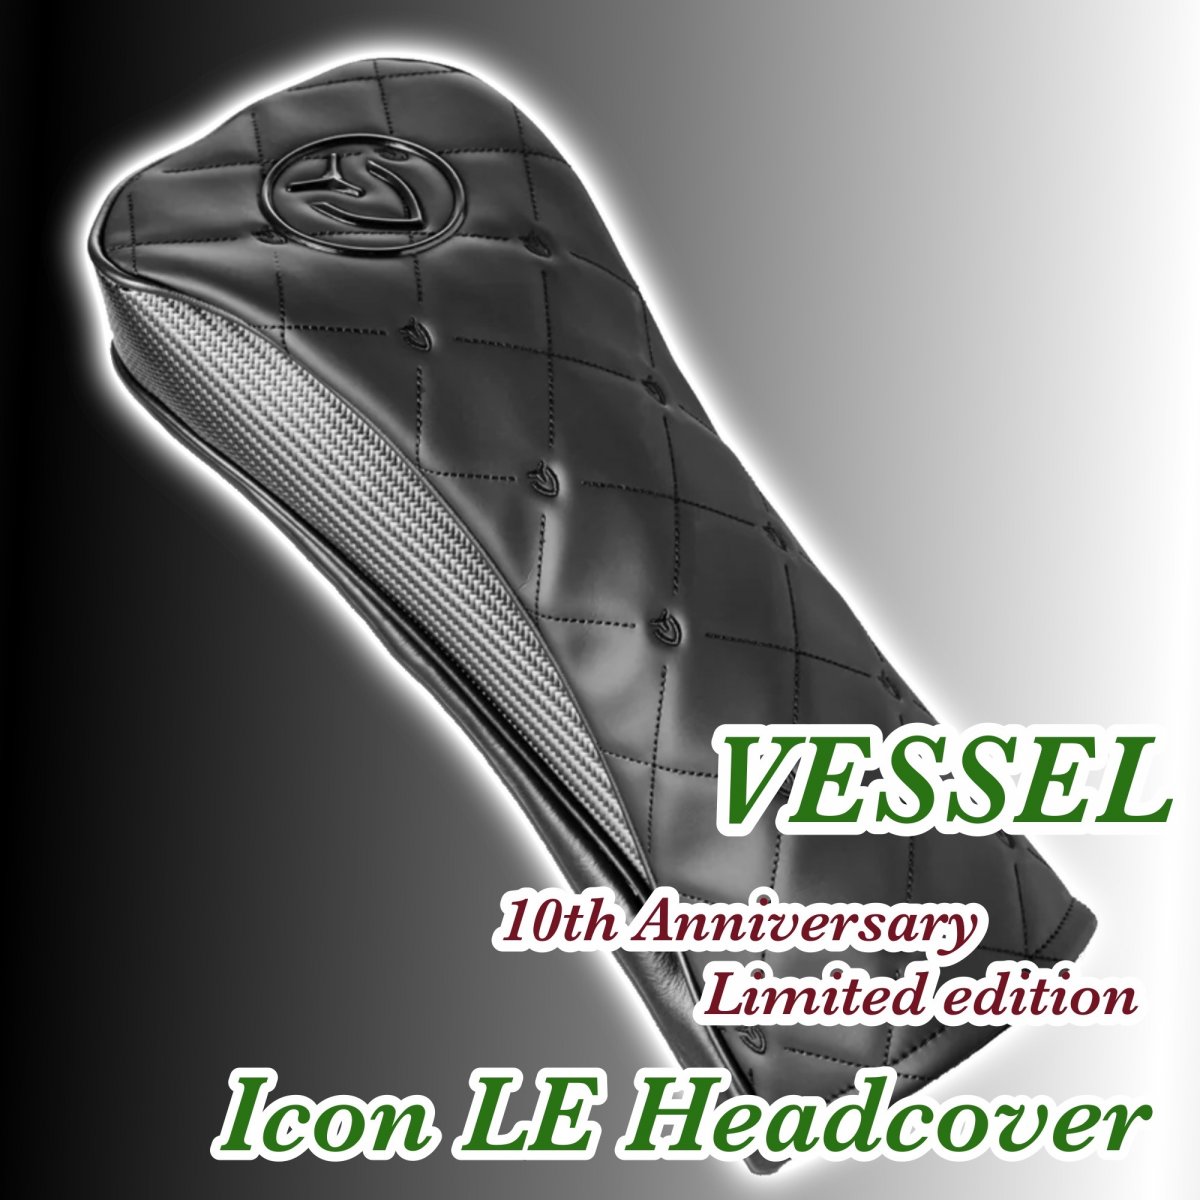 Veaael Icon LE Headcover VESSEL 10th Anniversary Limited edition